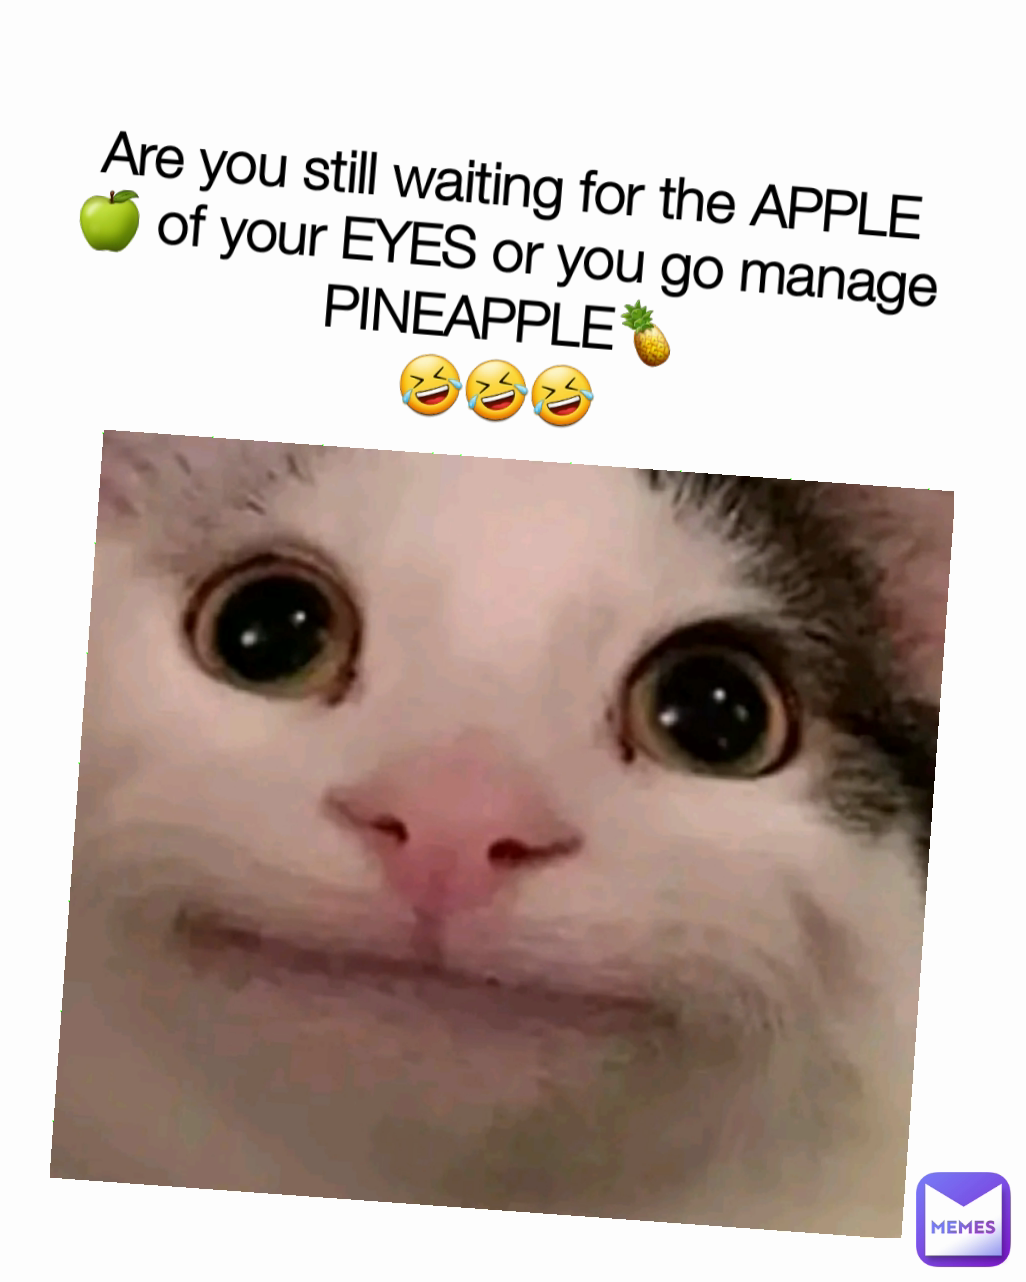 Are you still waiting for the APPLE🍏 of your EYES or you go manage PINEAPPLE🍍
🤣🤣🤣